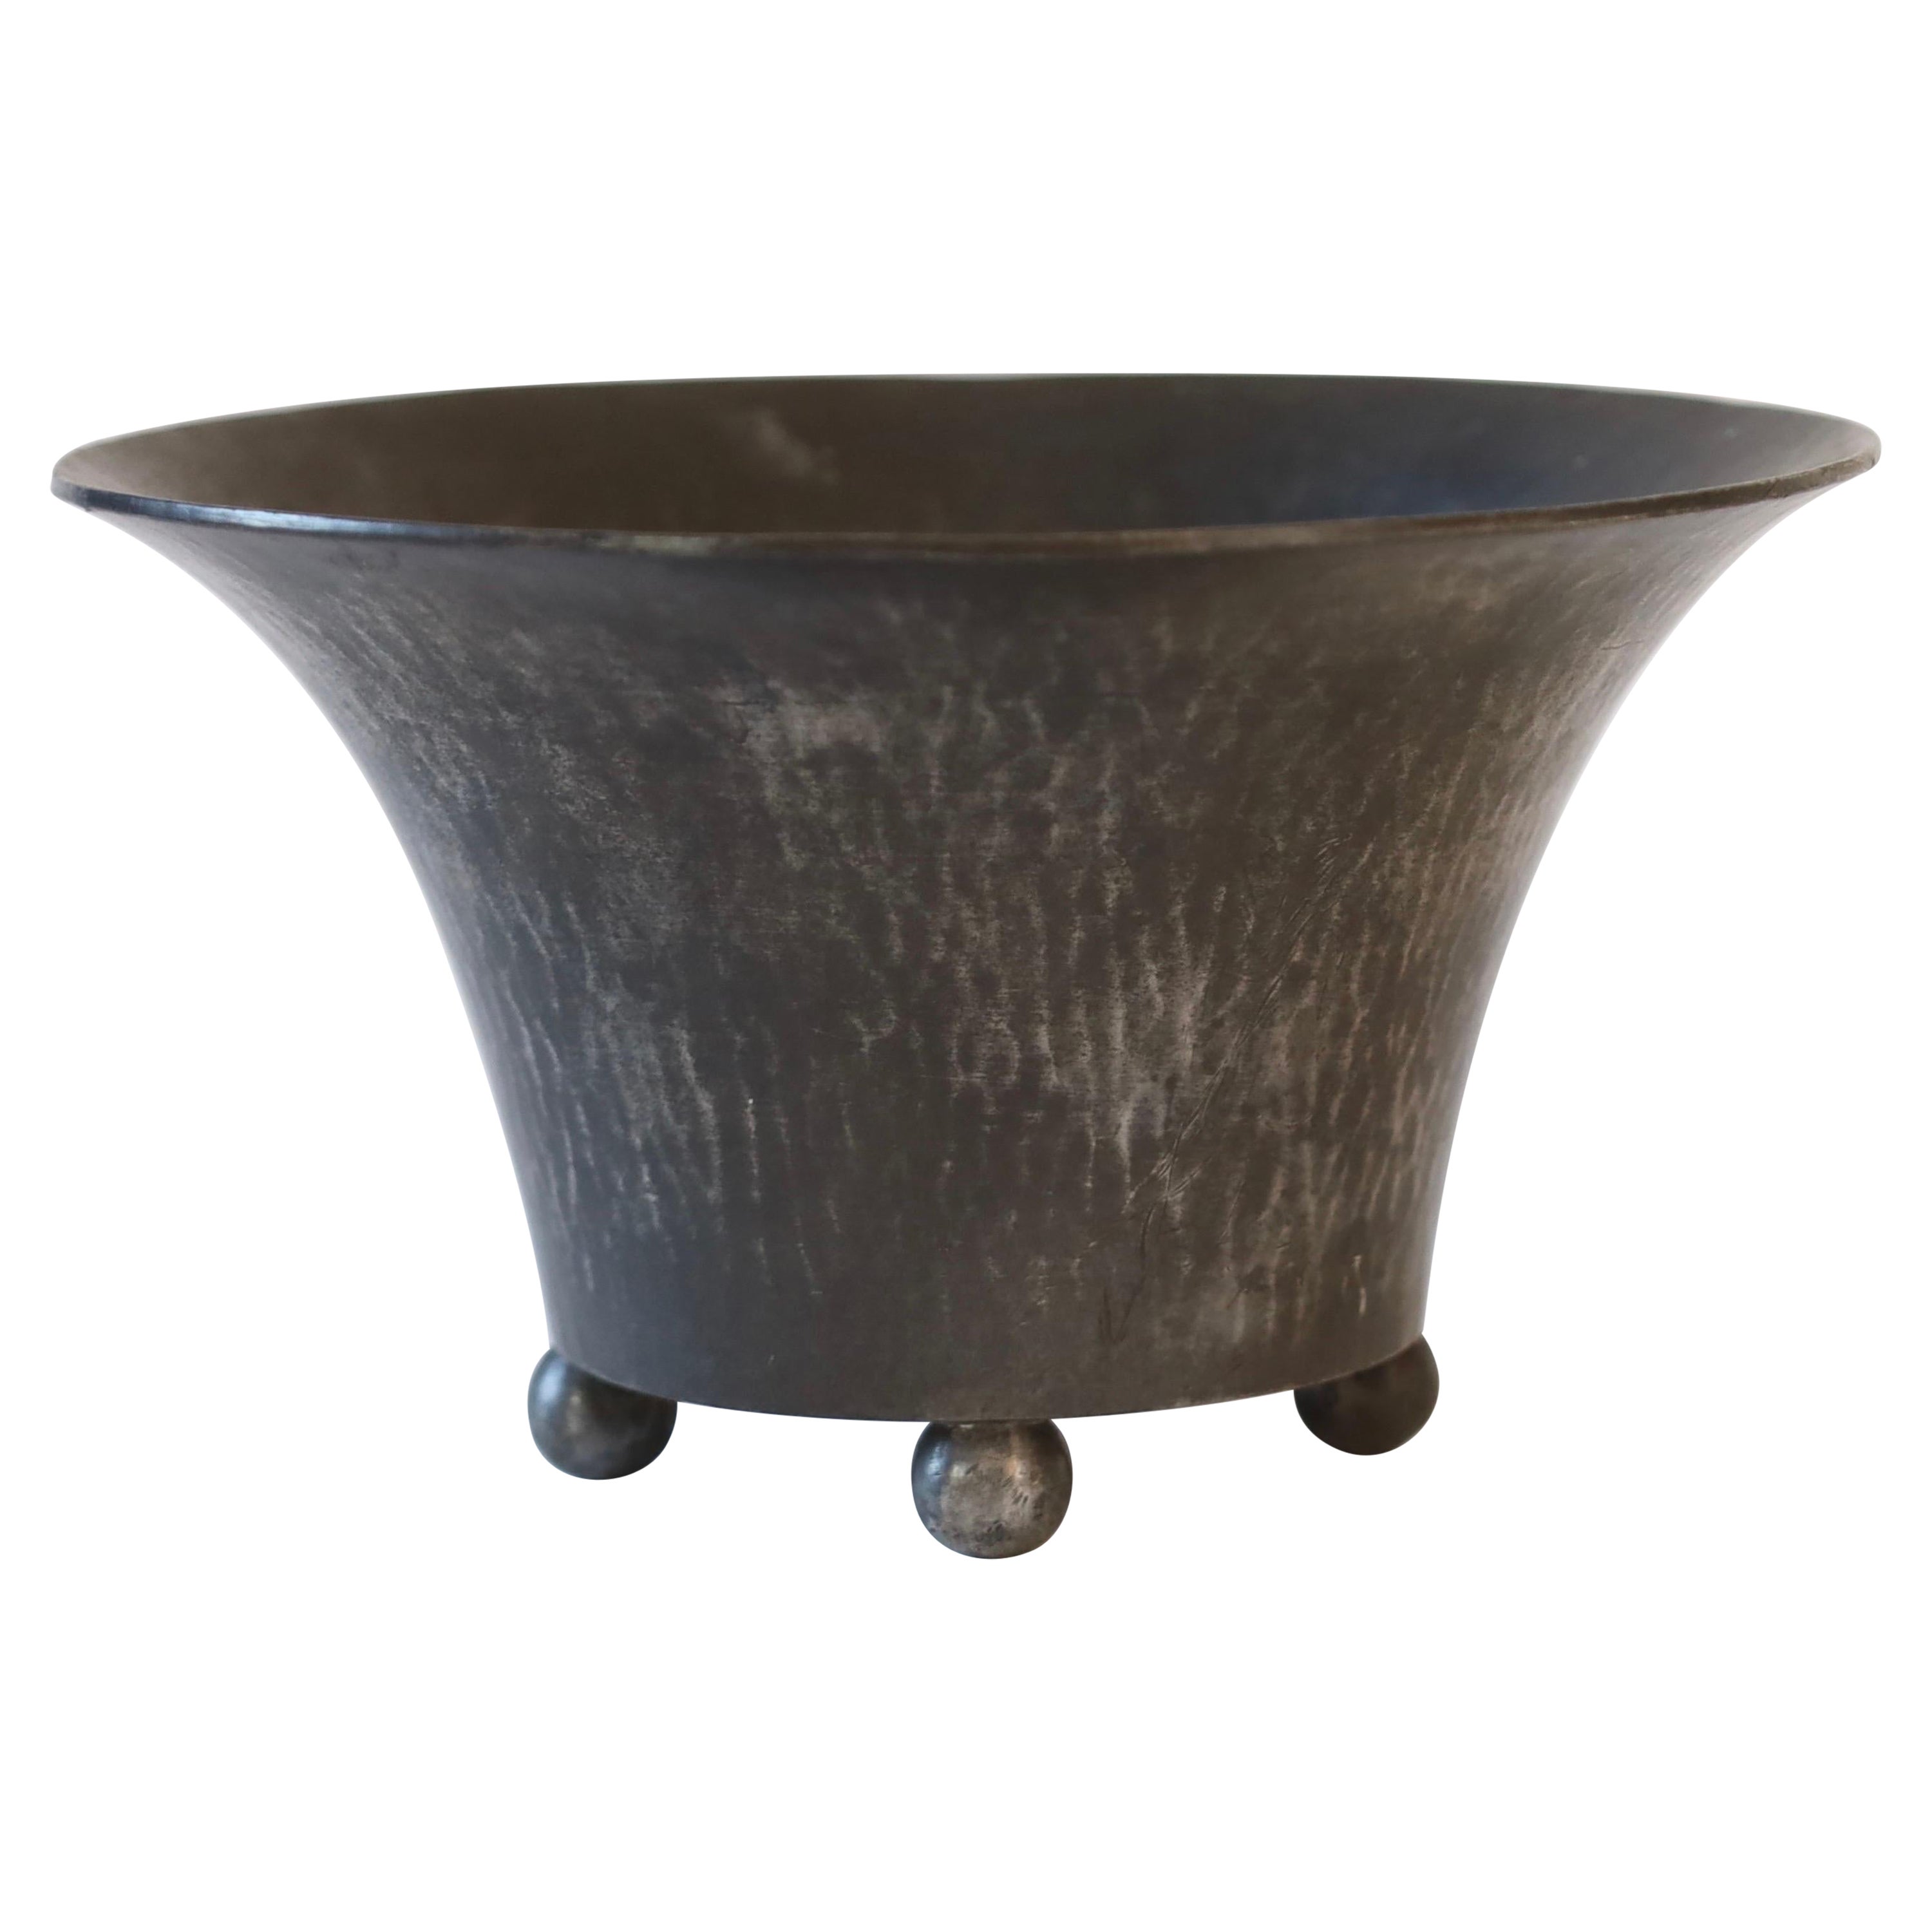 Hammered pewter bowl by Just Andersen, 1920s, Denmark